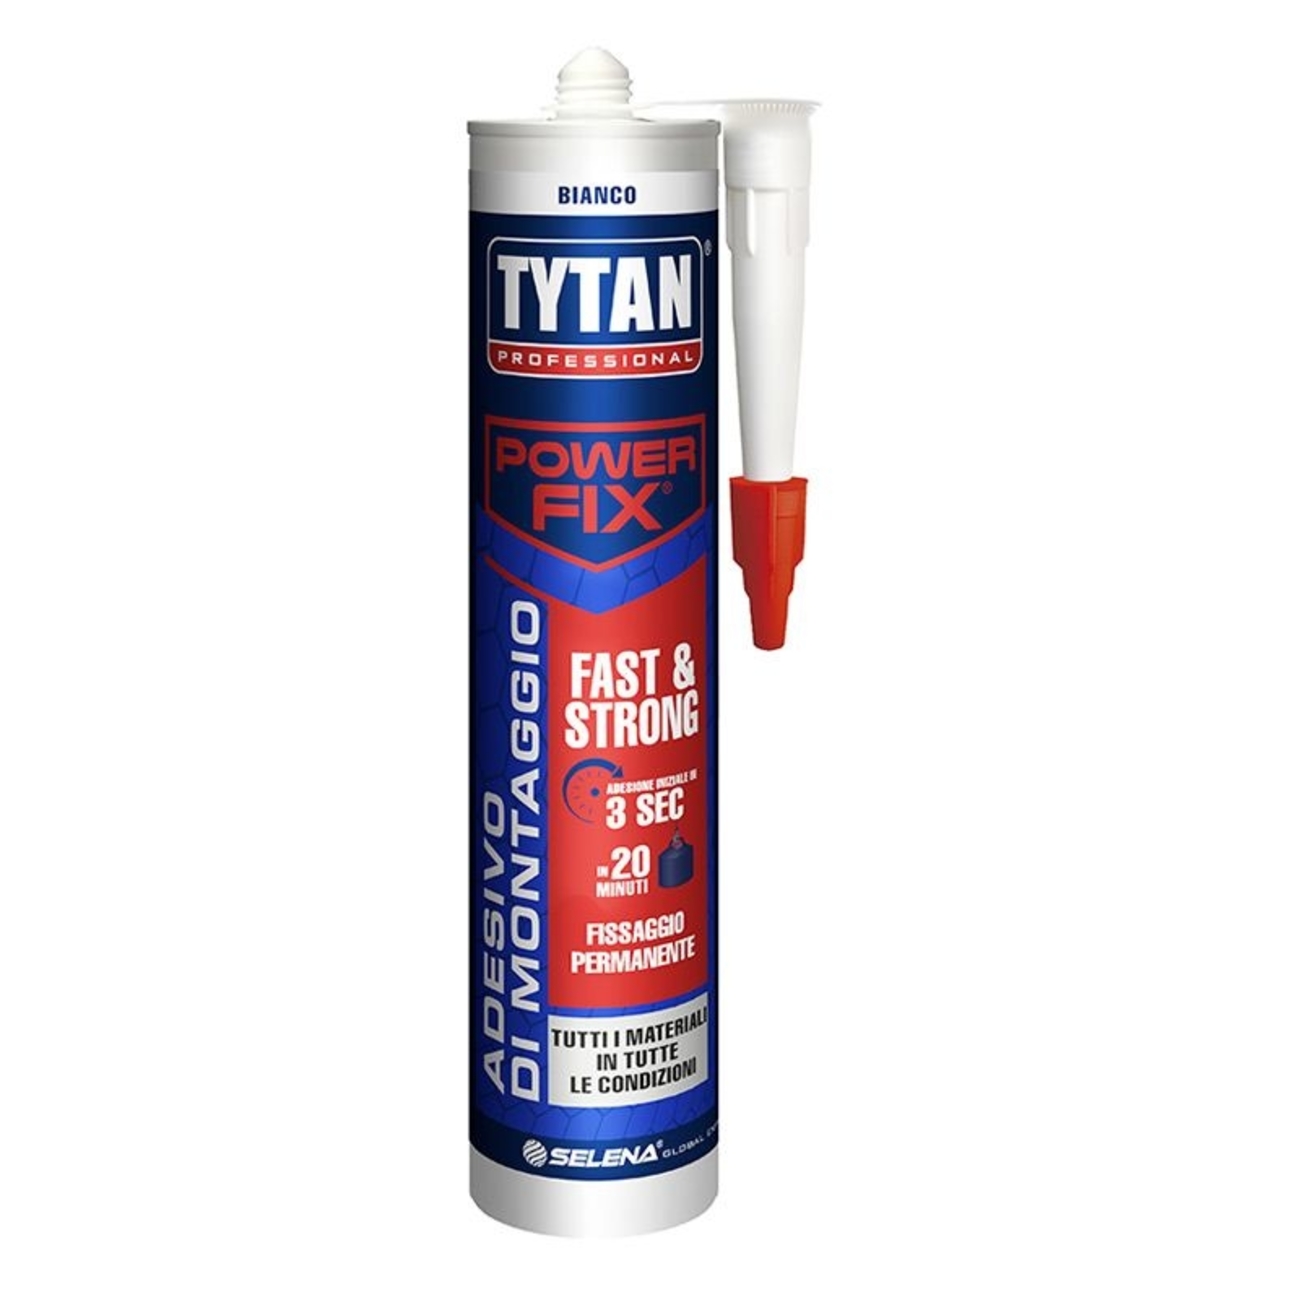 Tytan Professional FAST & STRONG